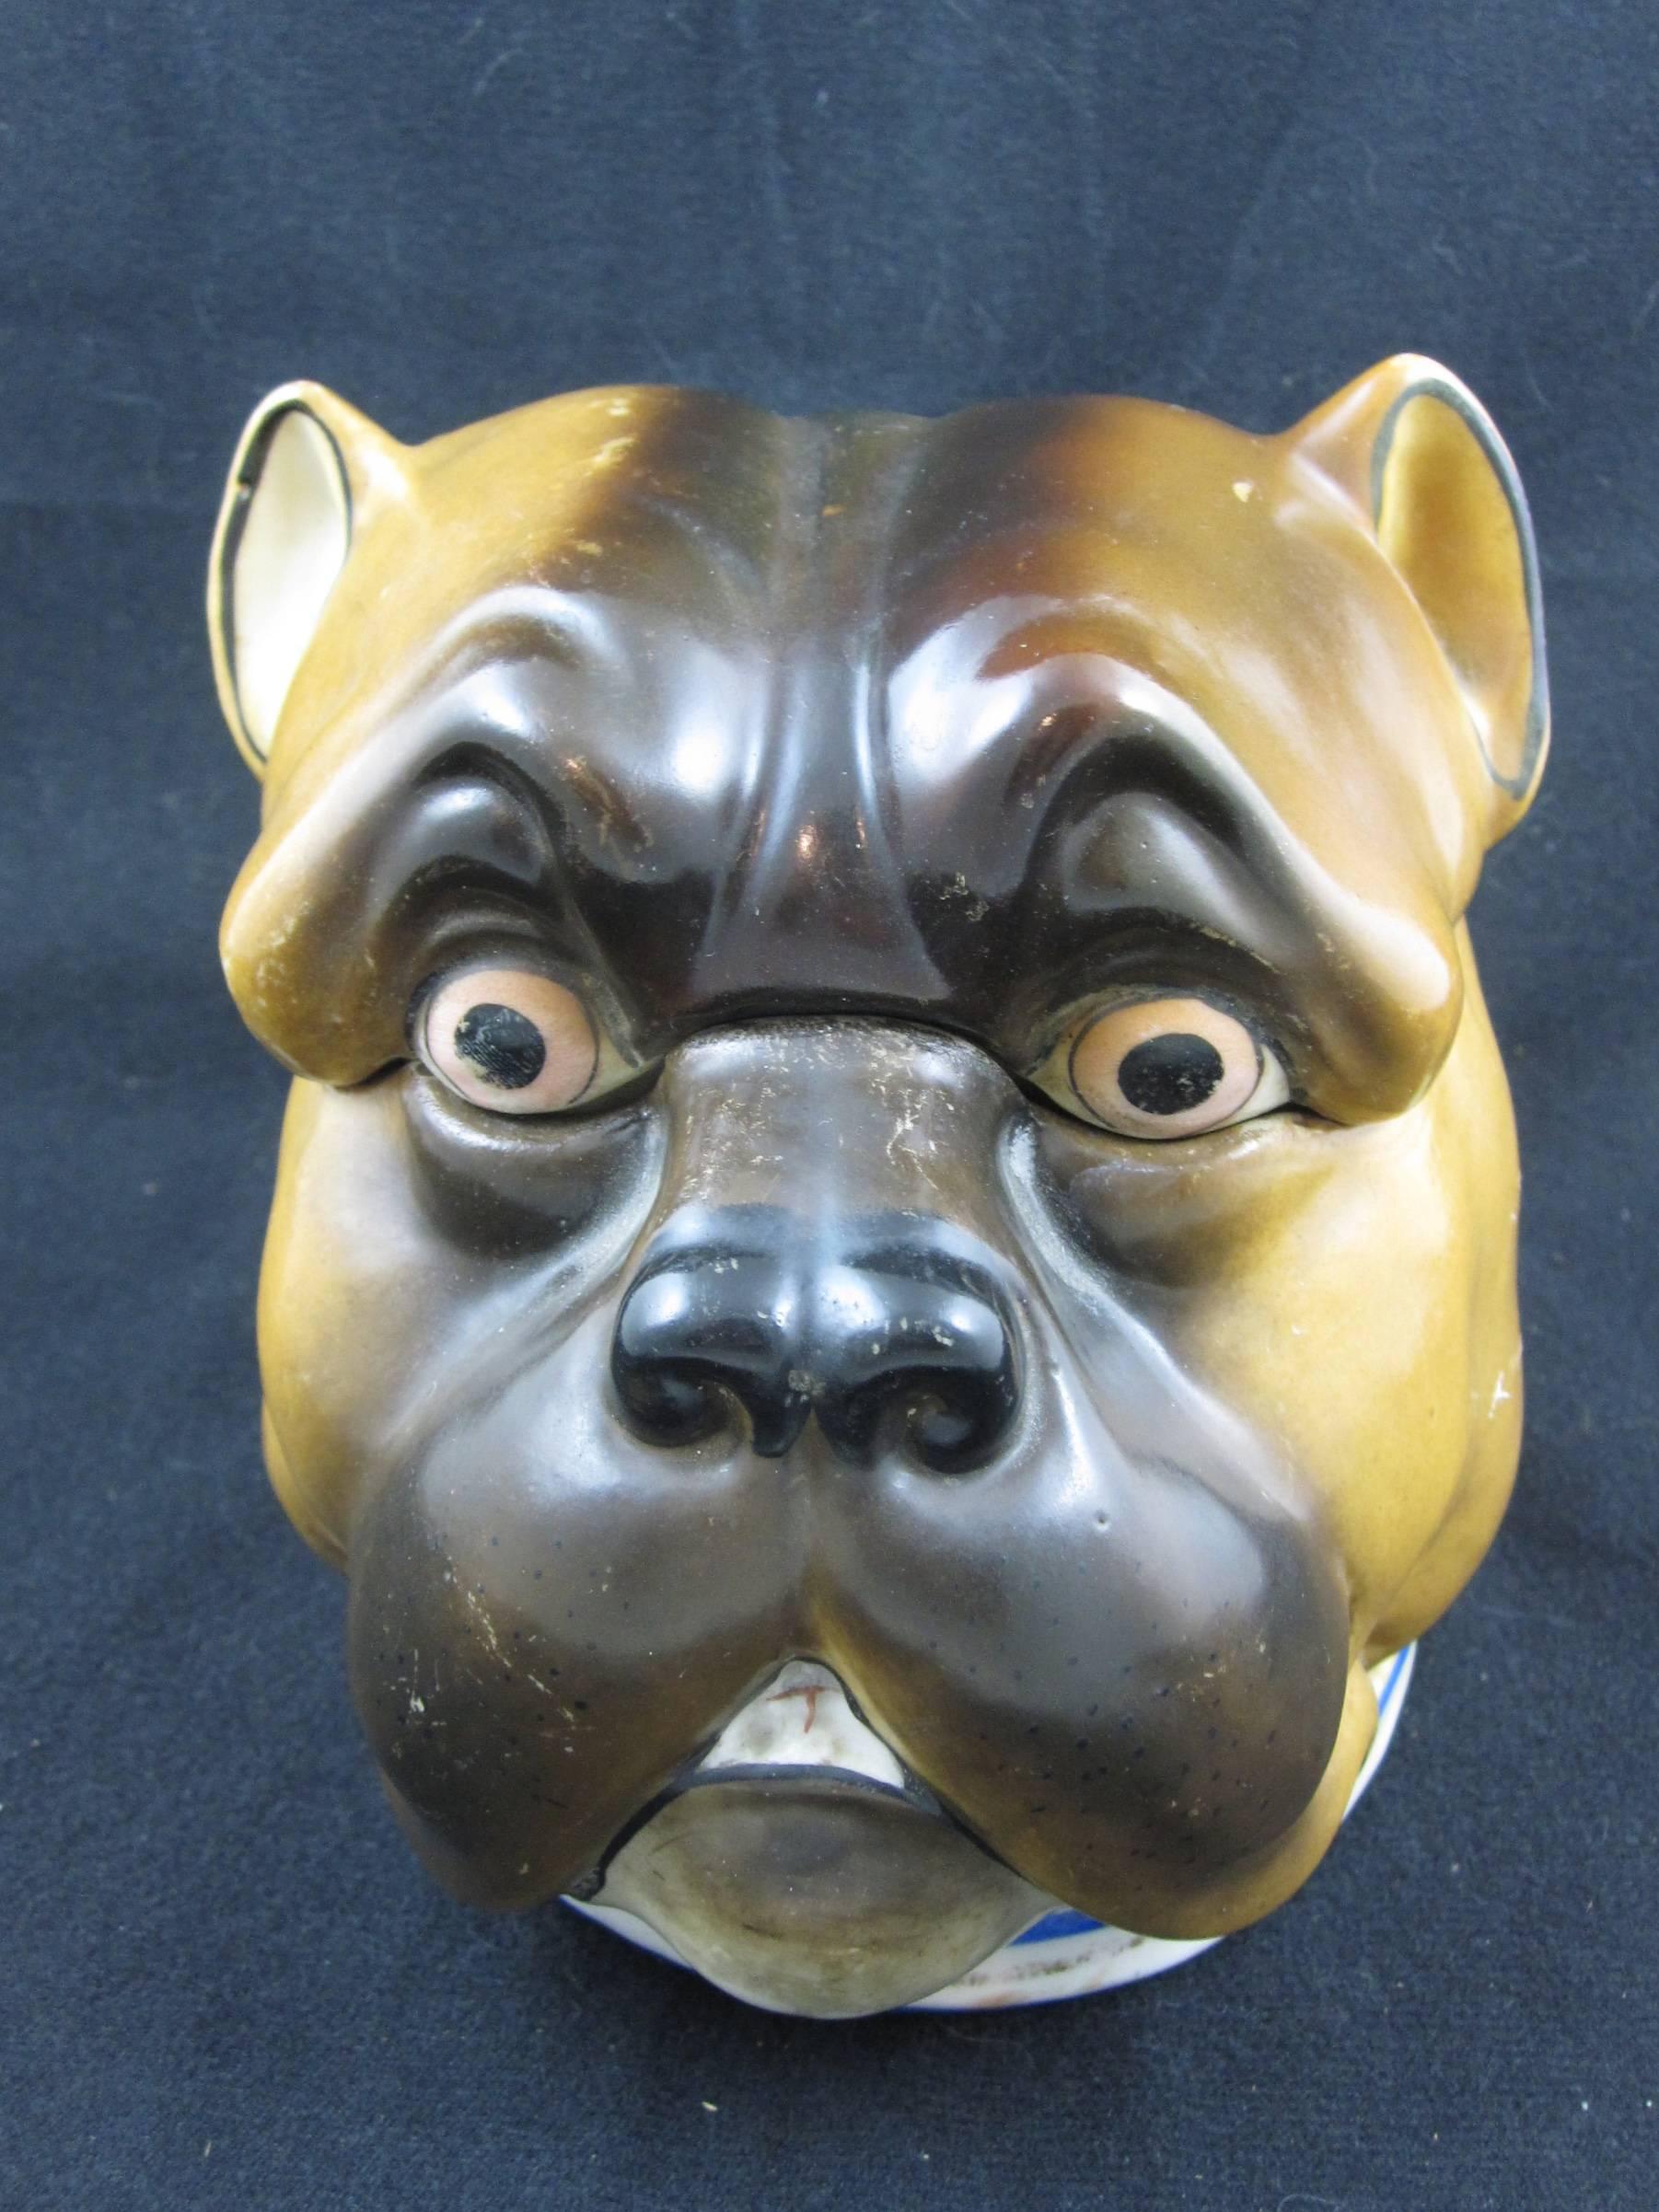 A porcelaneous lidded jar or humidor formed as the head of an English bull dog. Made in the Staffordshire region of England, mid- late 19th Century.

Modeled true to breed, realistic both in expression and coloring, a blue lined, buckled dog collar